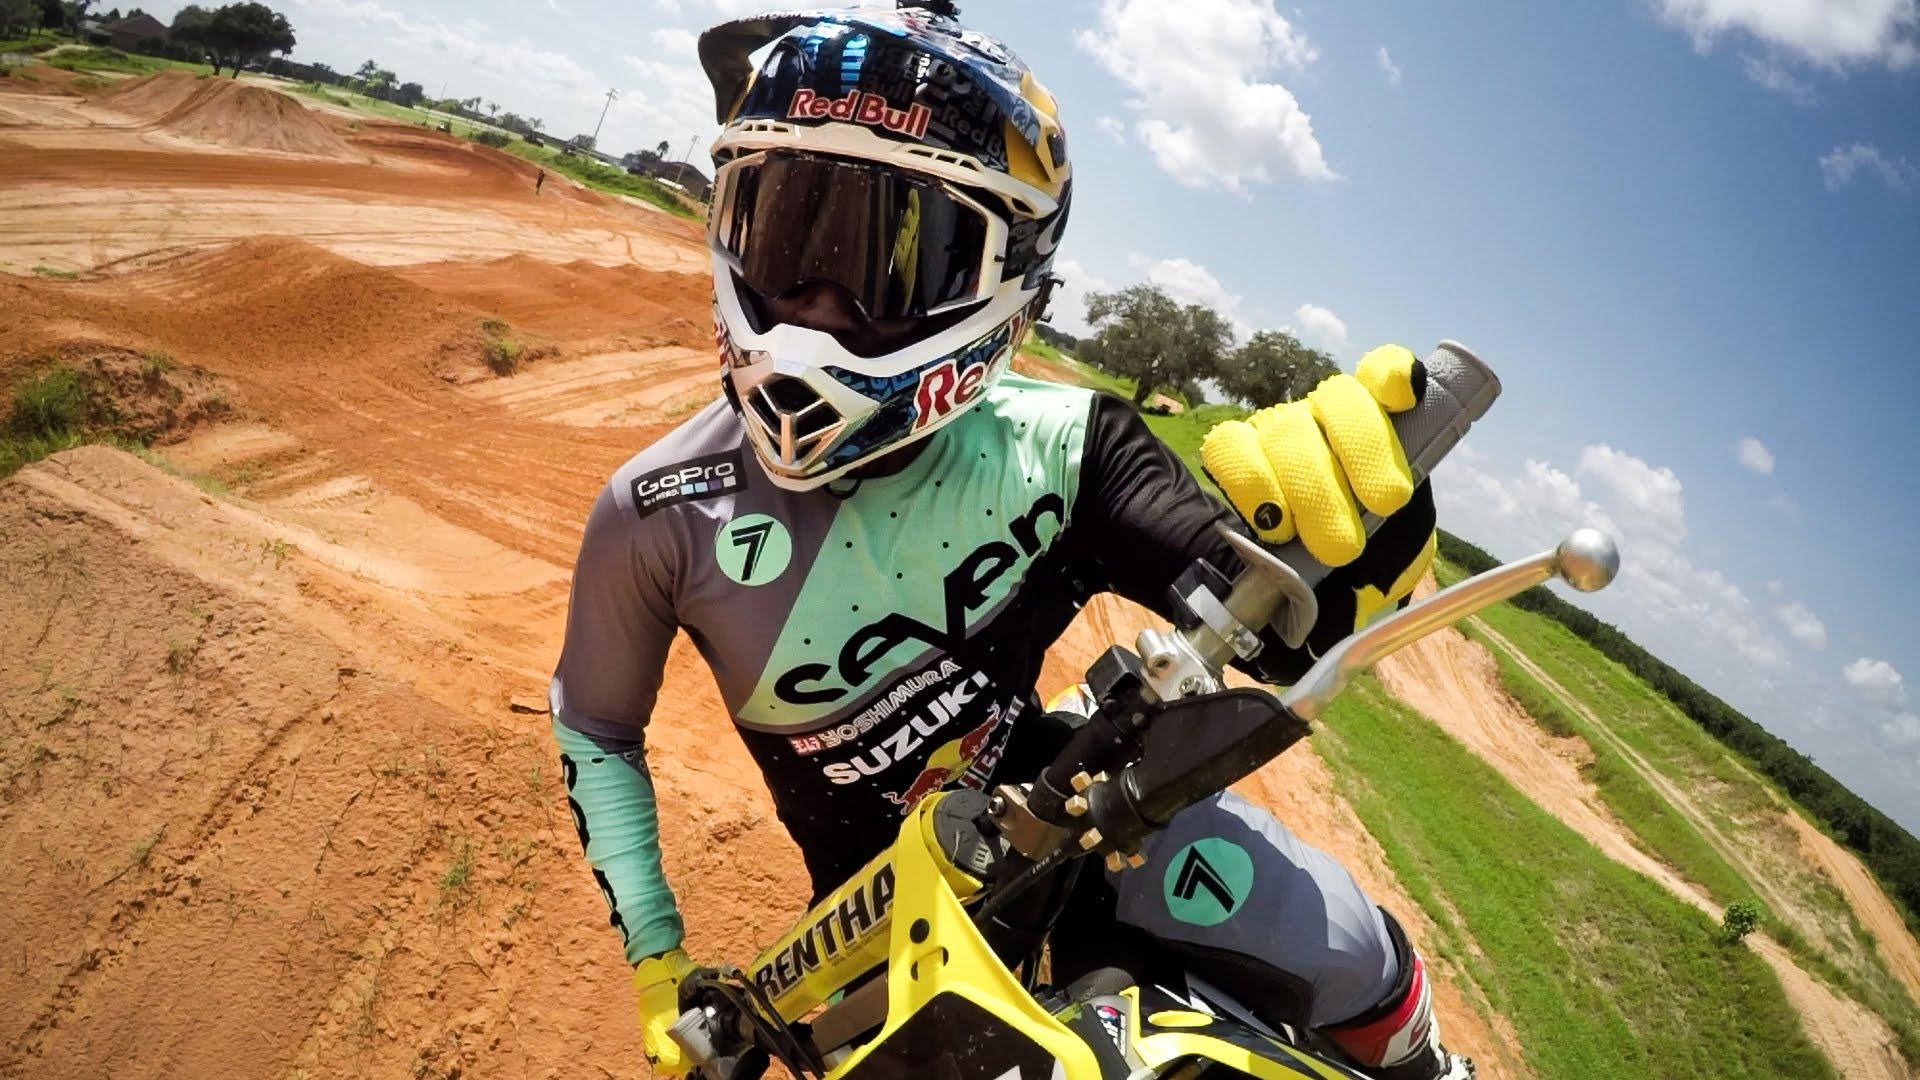 GoPro: A Lap at Home with James Stewart